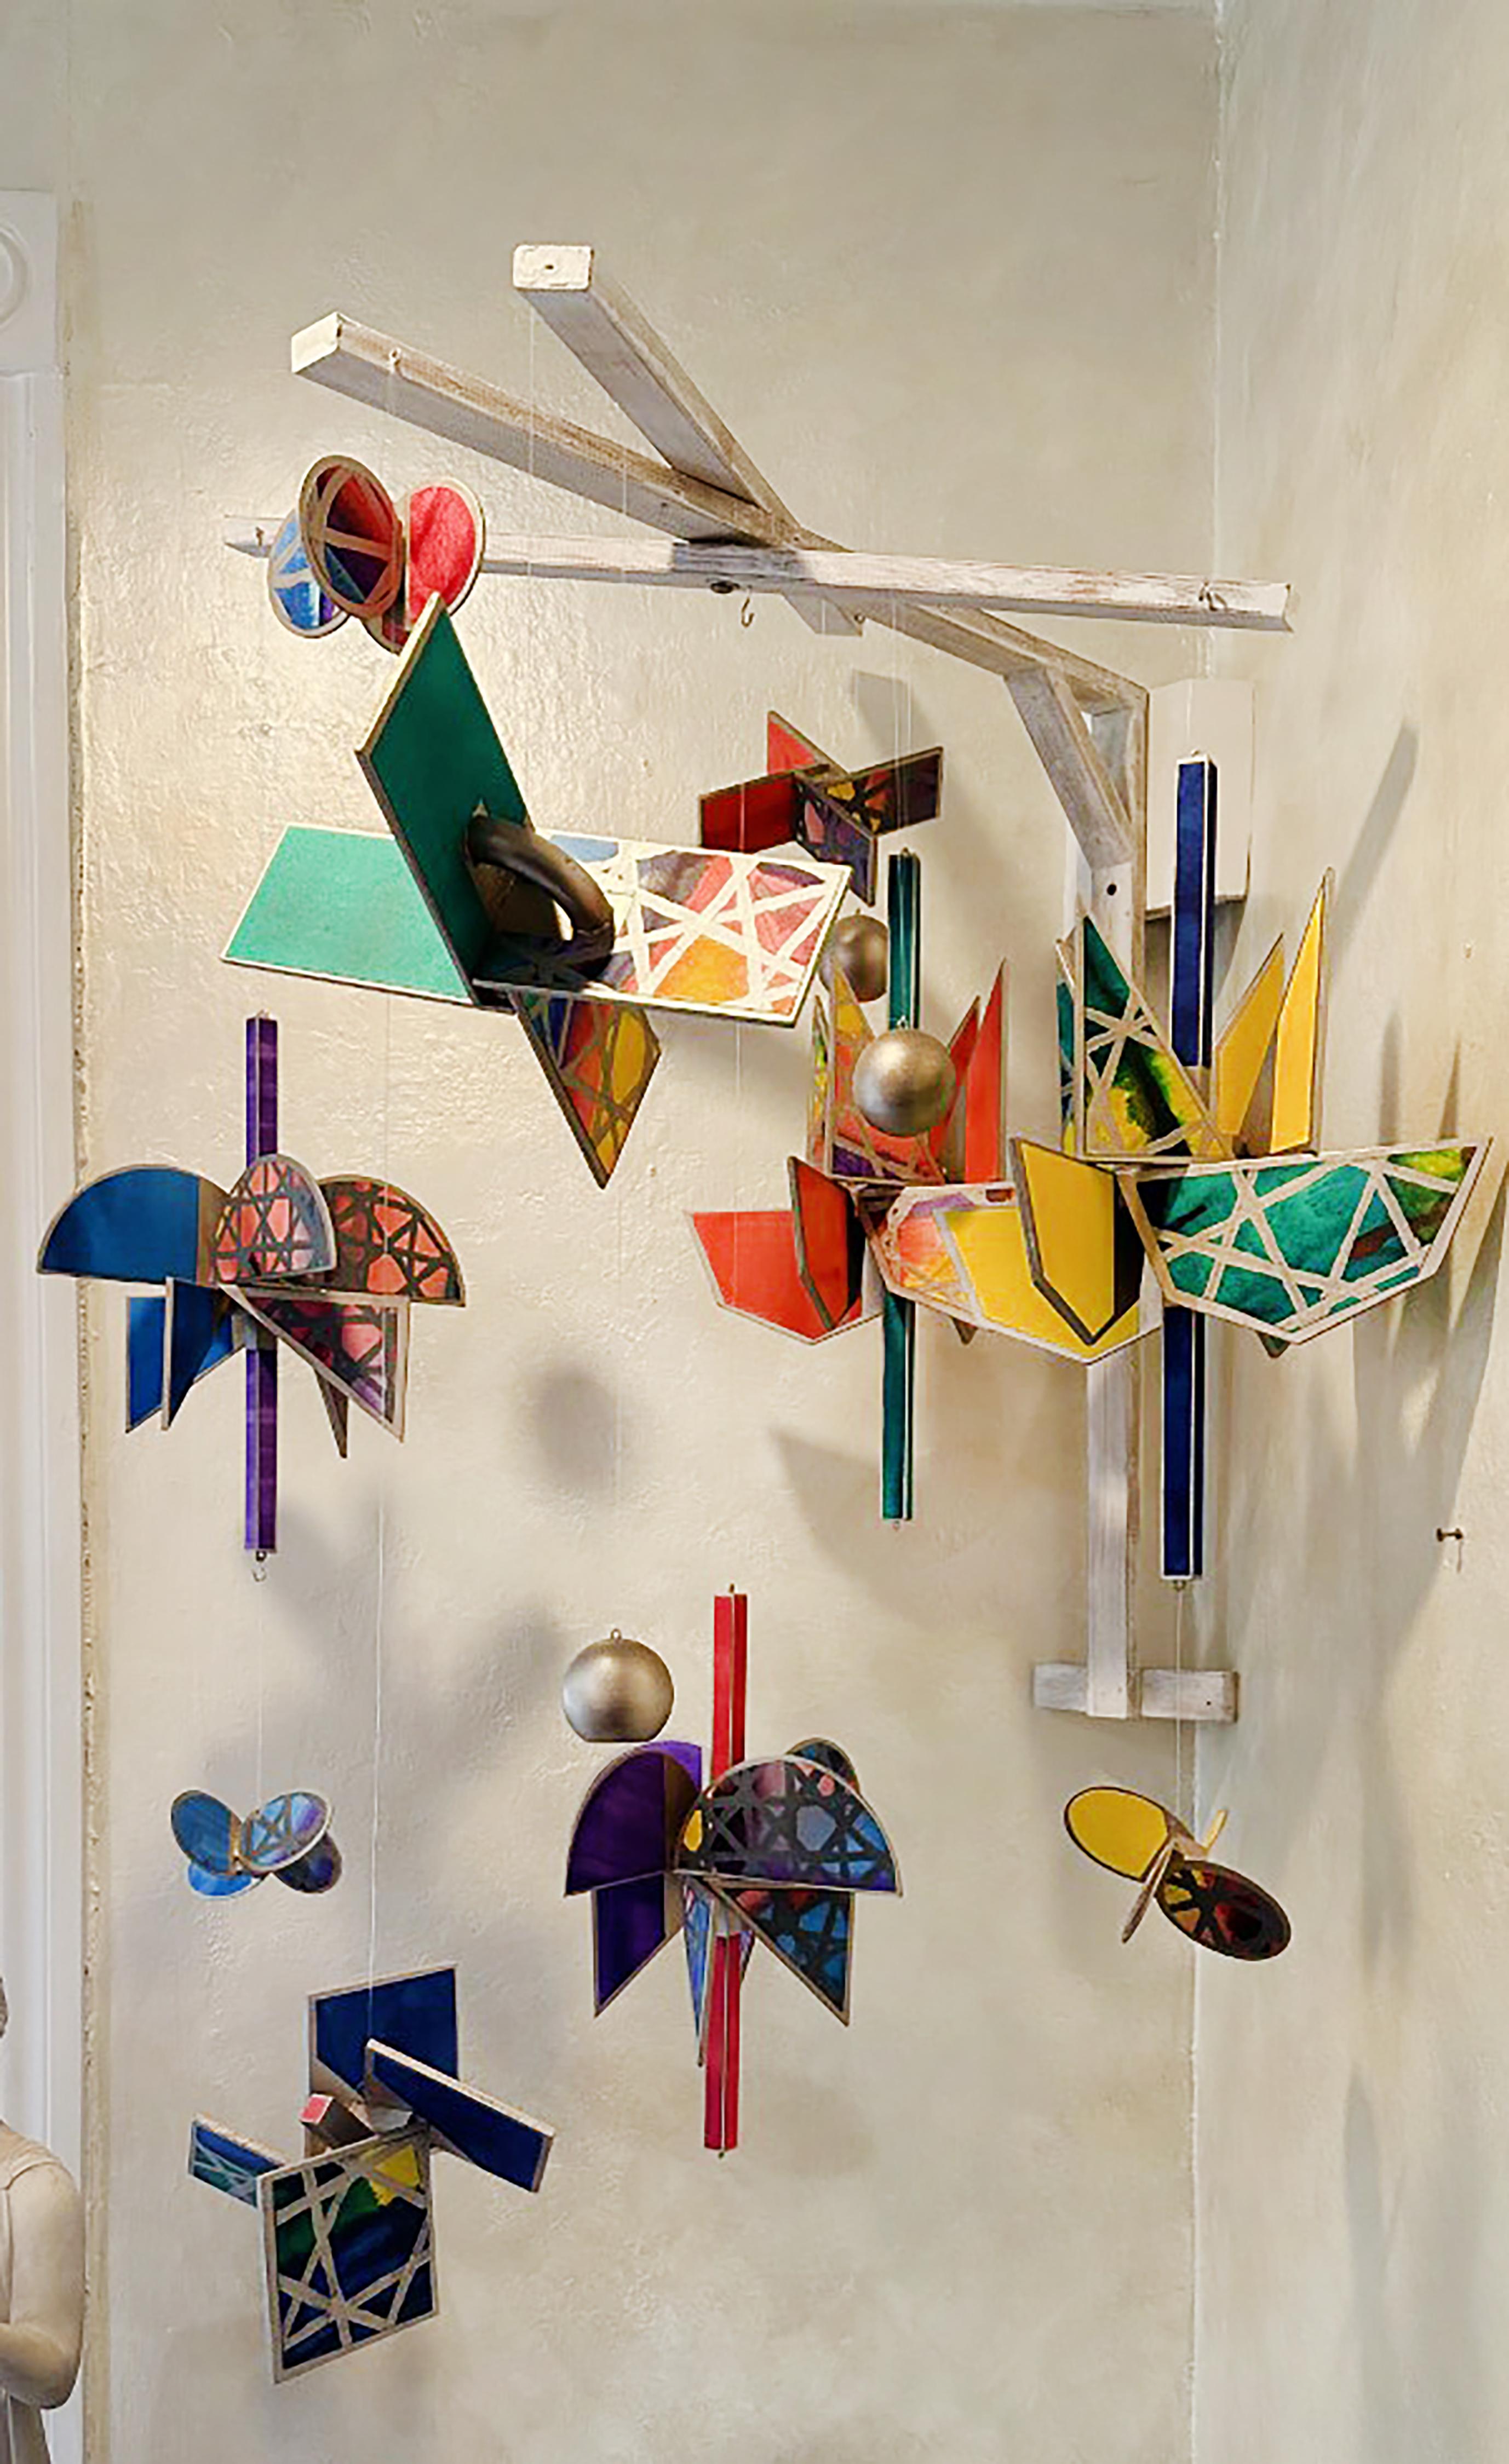 A vibrant, kinetic, and dynamic aerial turbine sculpture by artist Michael Tichansky. This colorful and fascinating piece was created by the artist in the mid 2010’s and was inspired partially by his involvement with the Madi Geometric art movement.